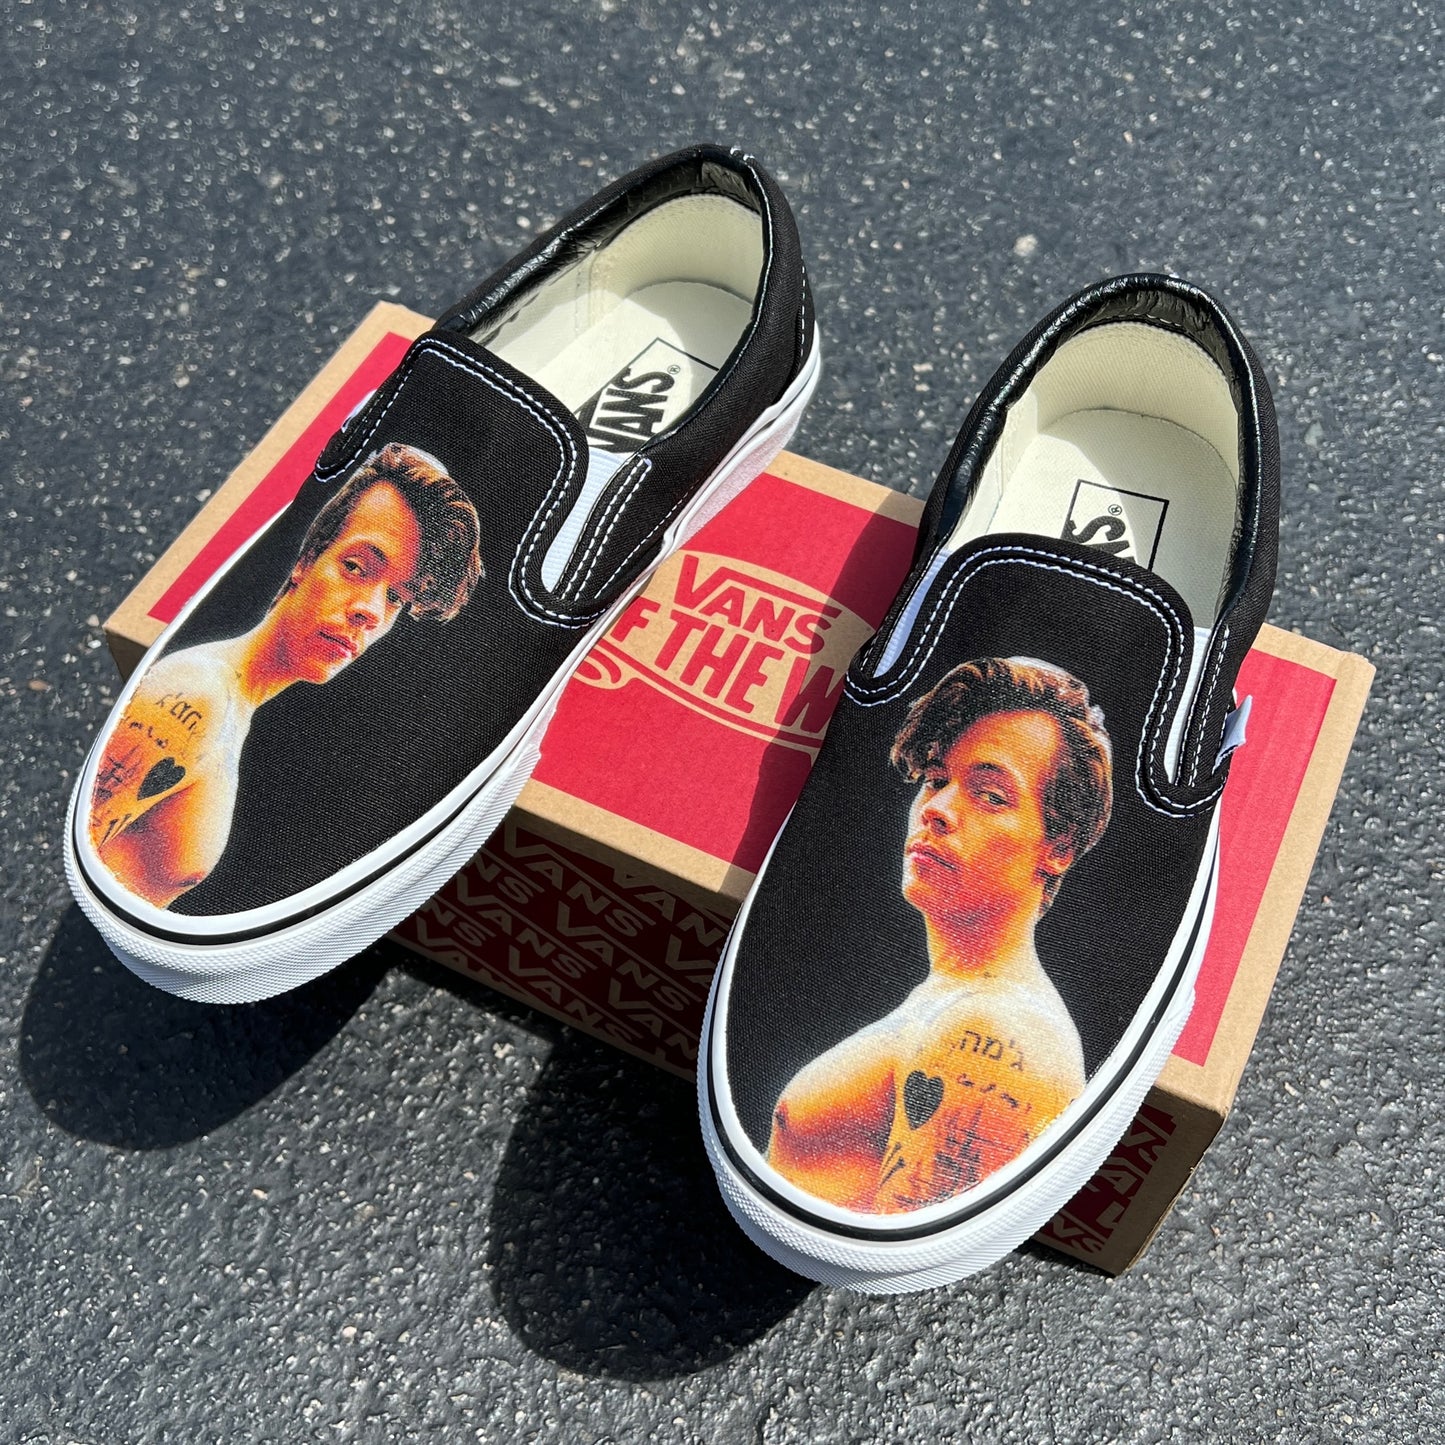 harry styles adore you custom sneakers shoes